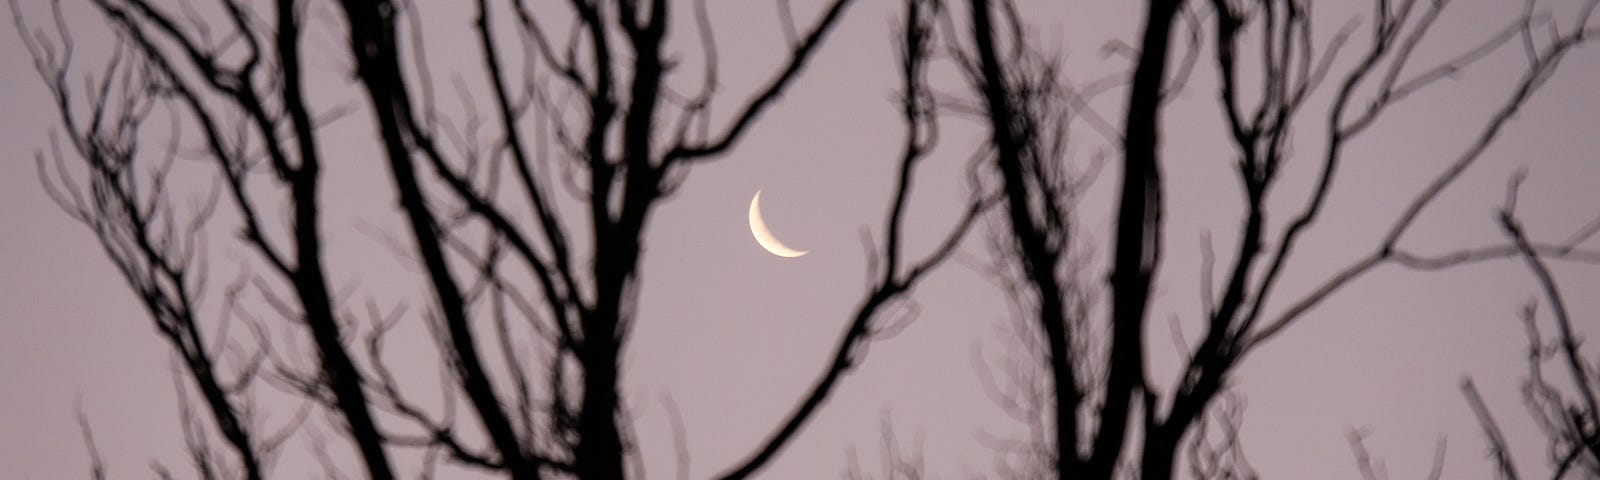 New moon through tree branches.